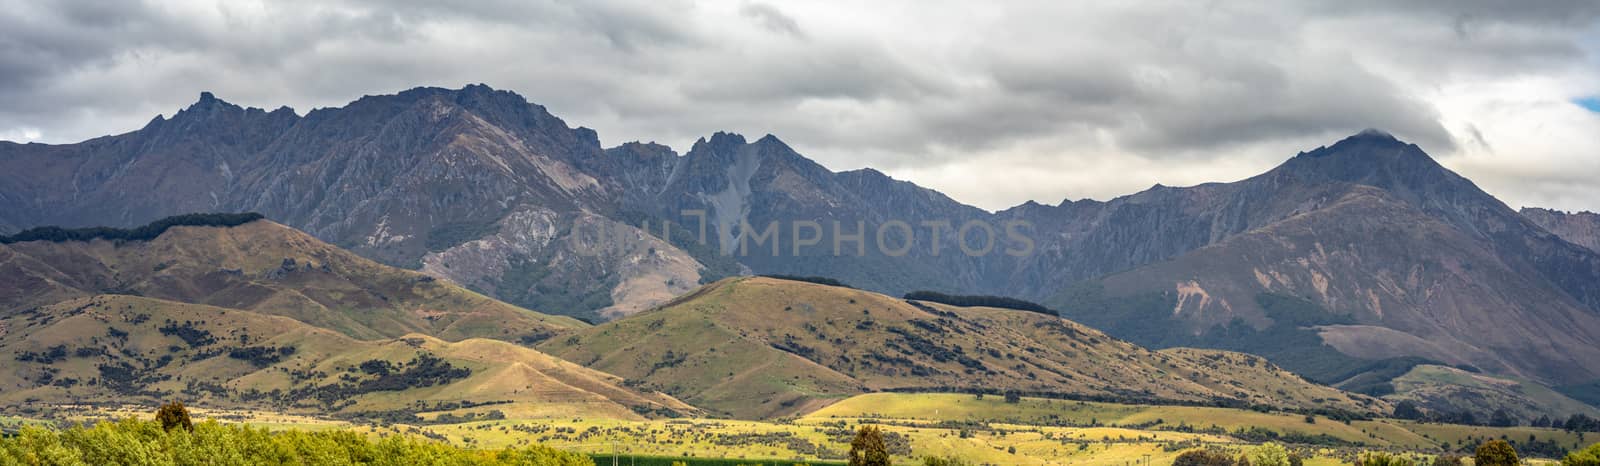 mountain view in New Zealand by magann